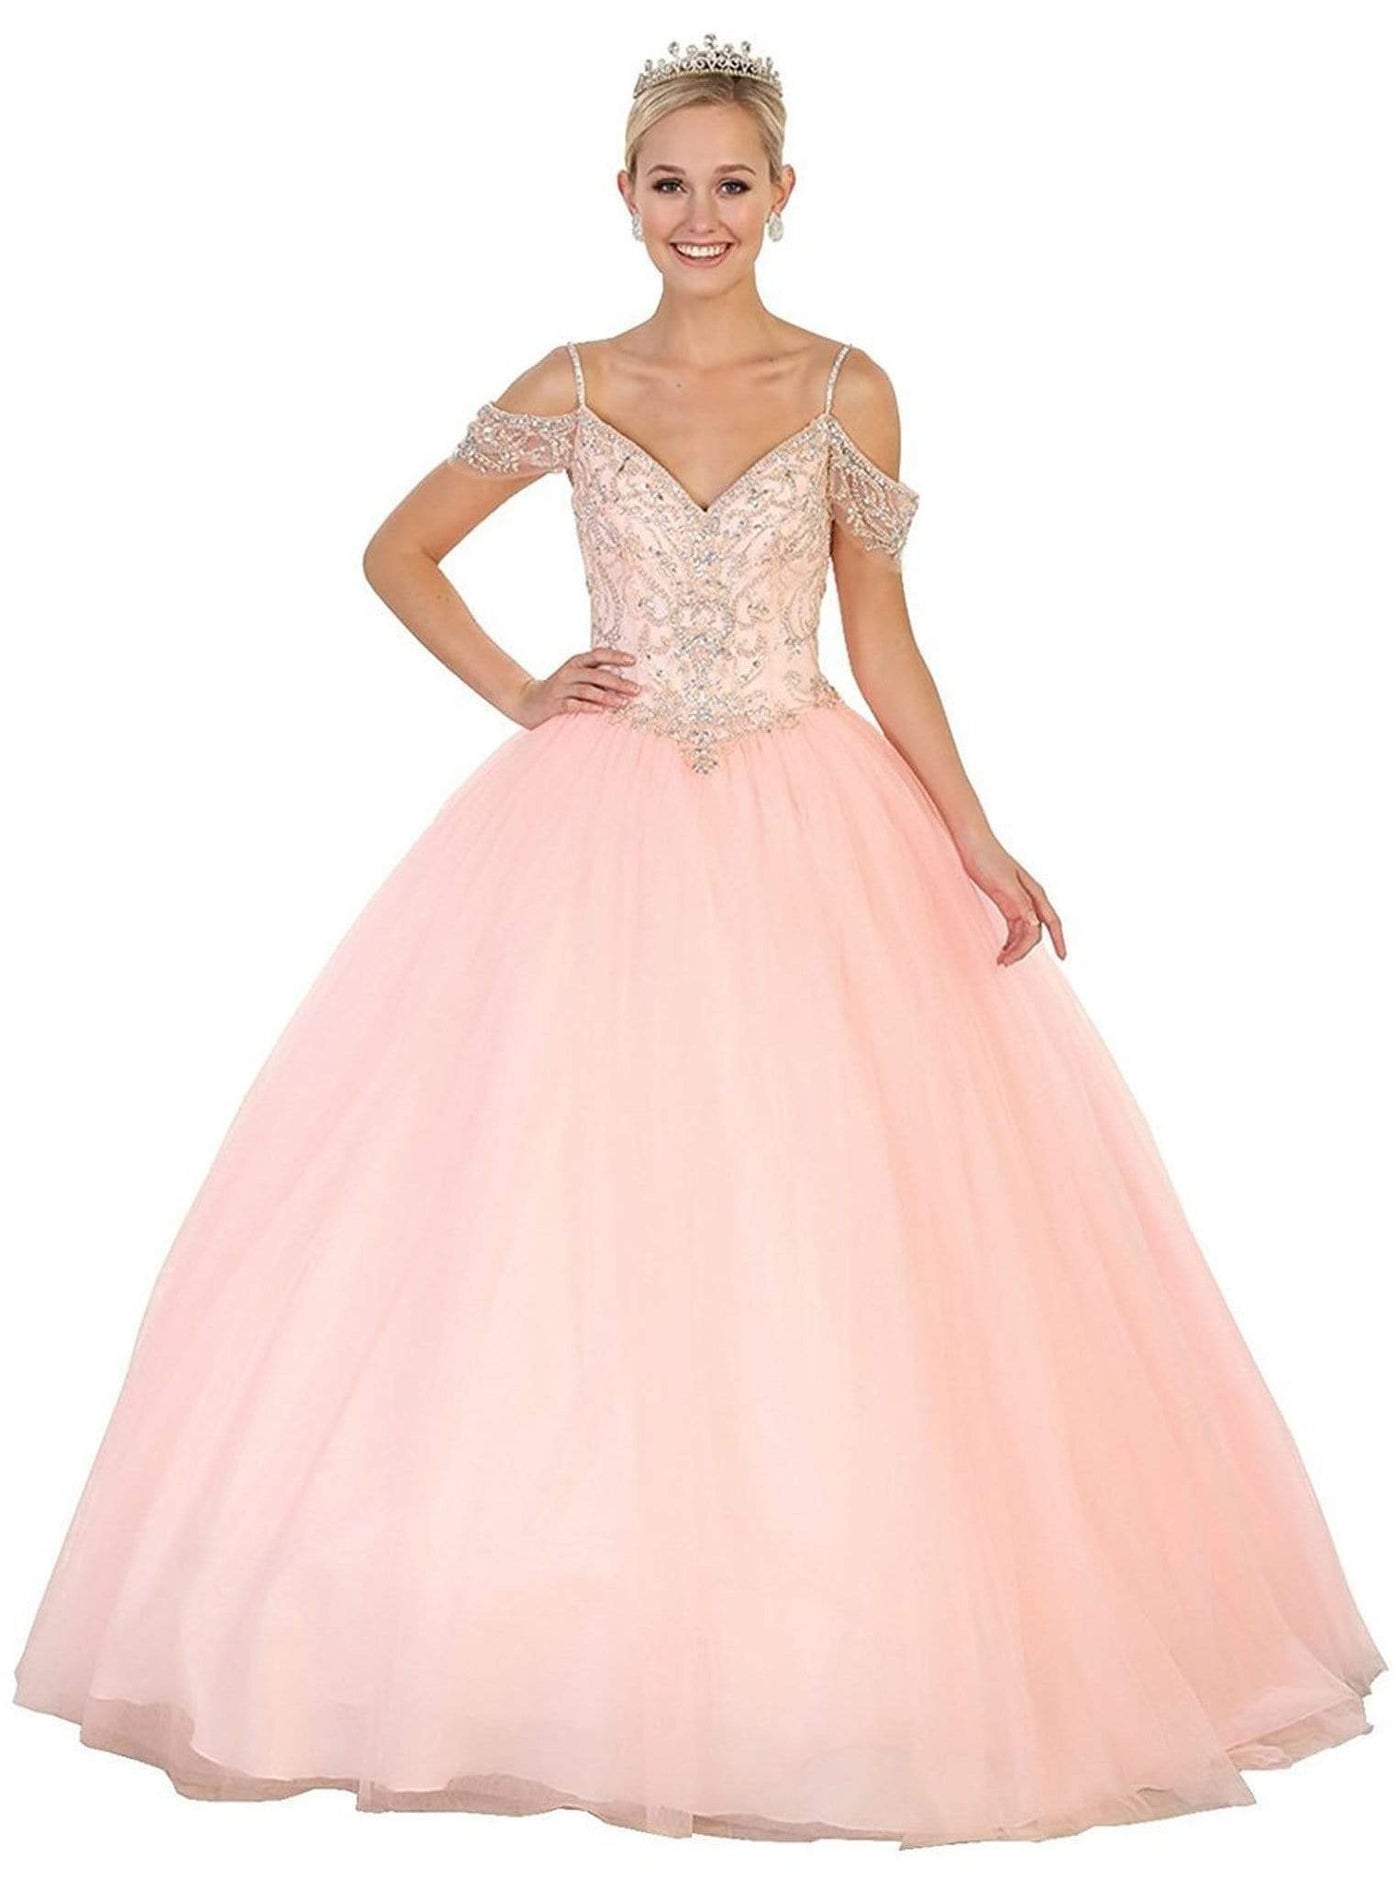 May Queen - LK96 Embellished V-neck Quinceanera Ballgown Special Occasion Dress 2 / Blush